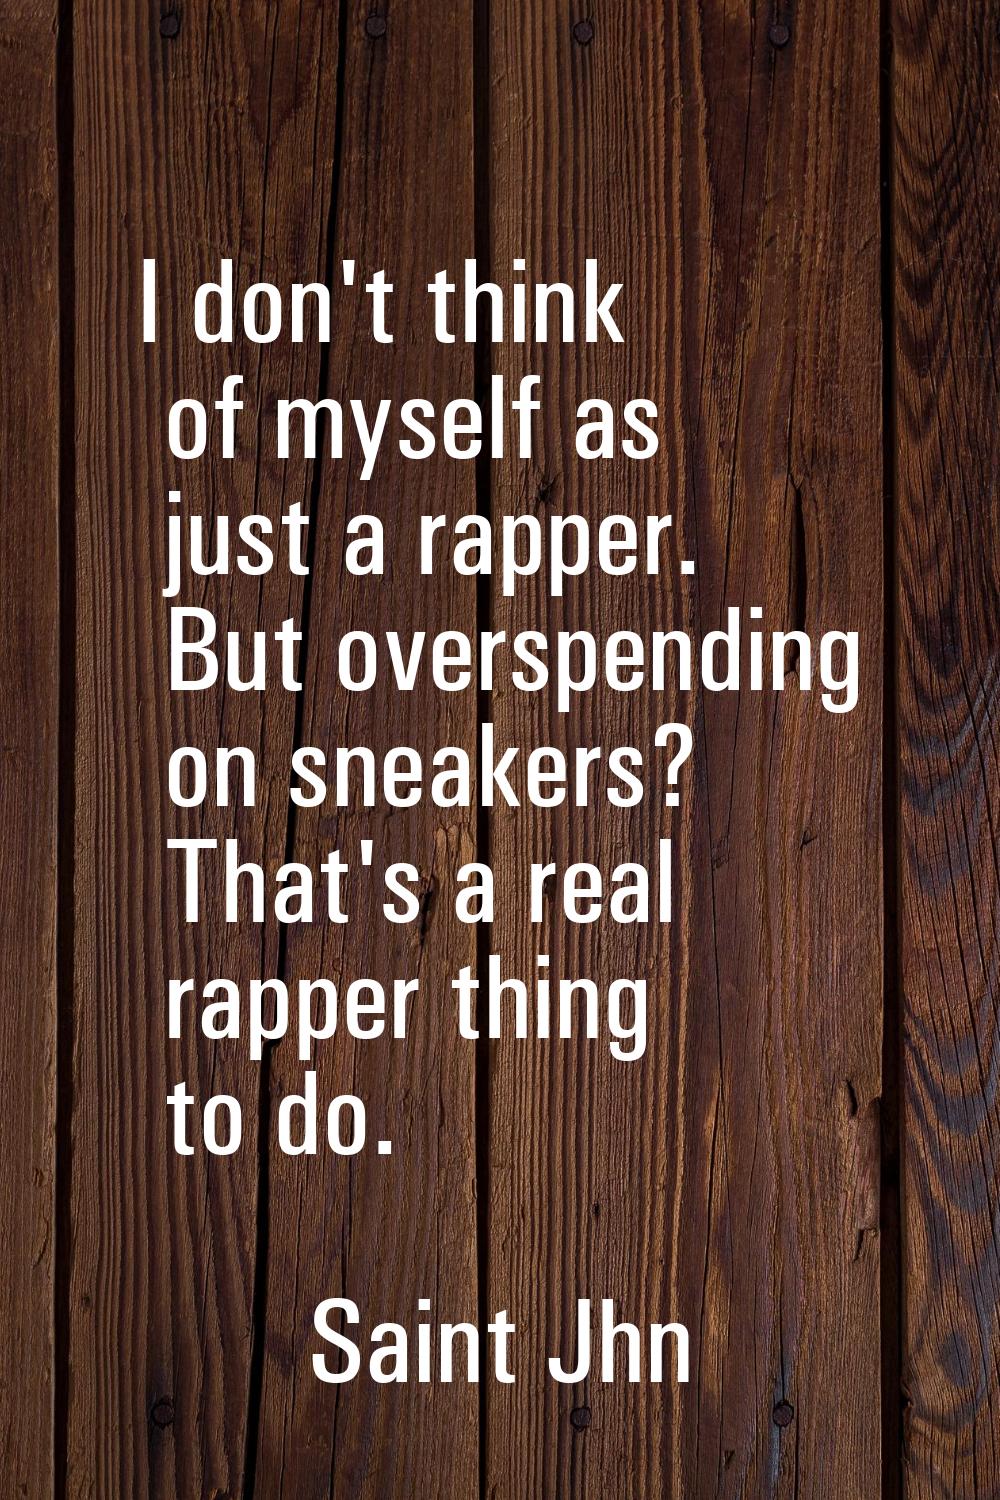 I don't think of myself as just a rapper. But overspending on sneakers? That's a real rapper thing 